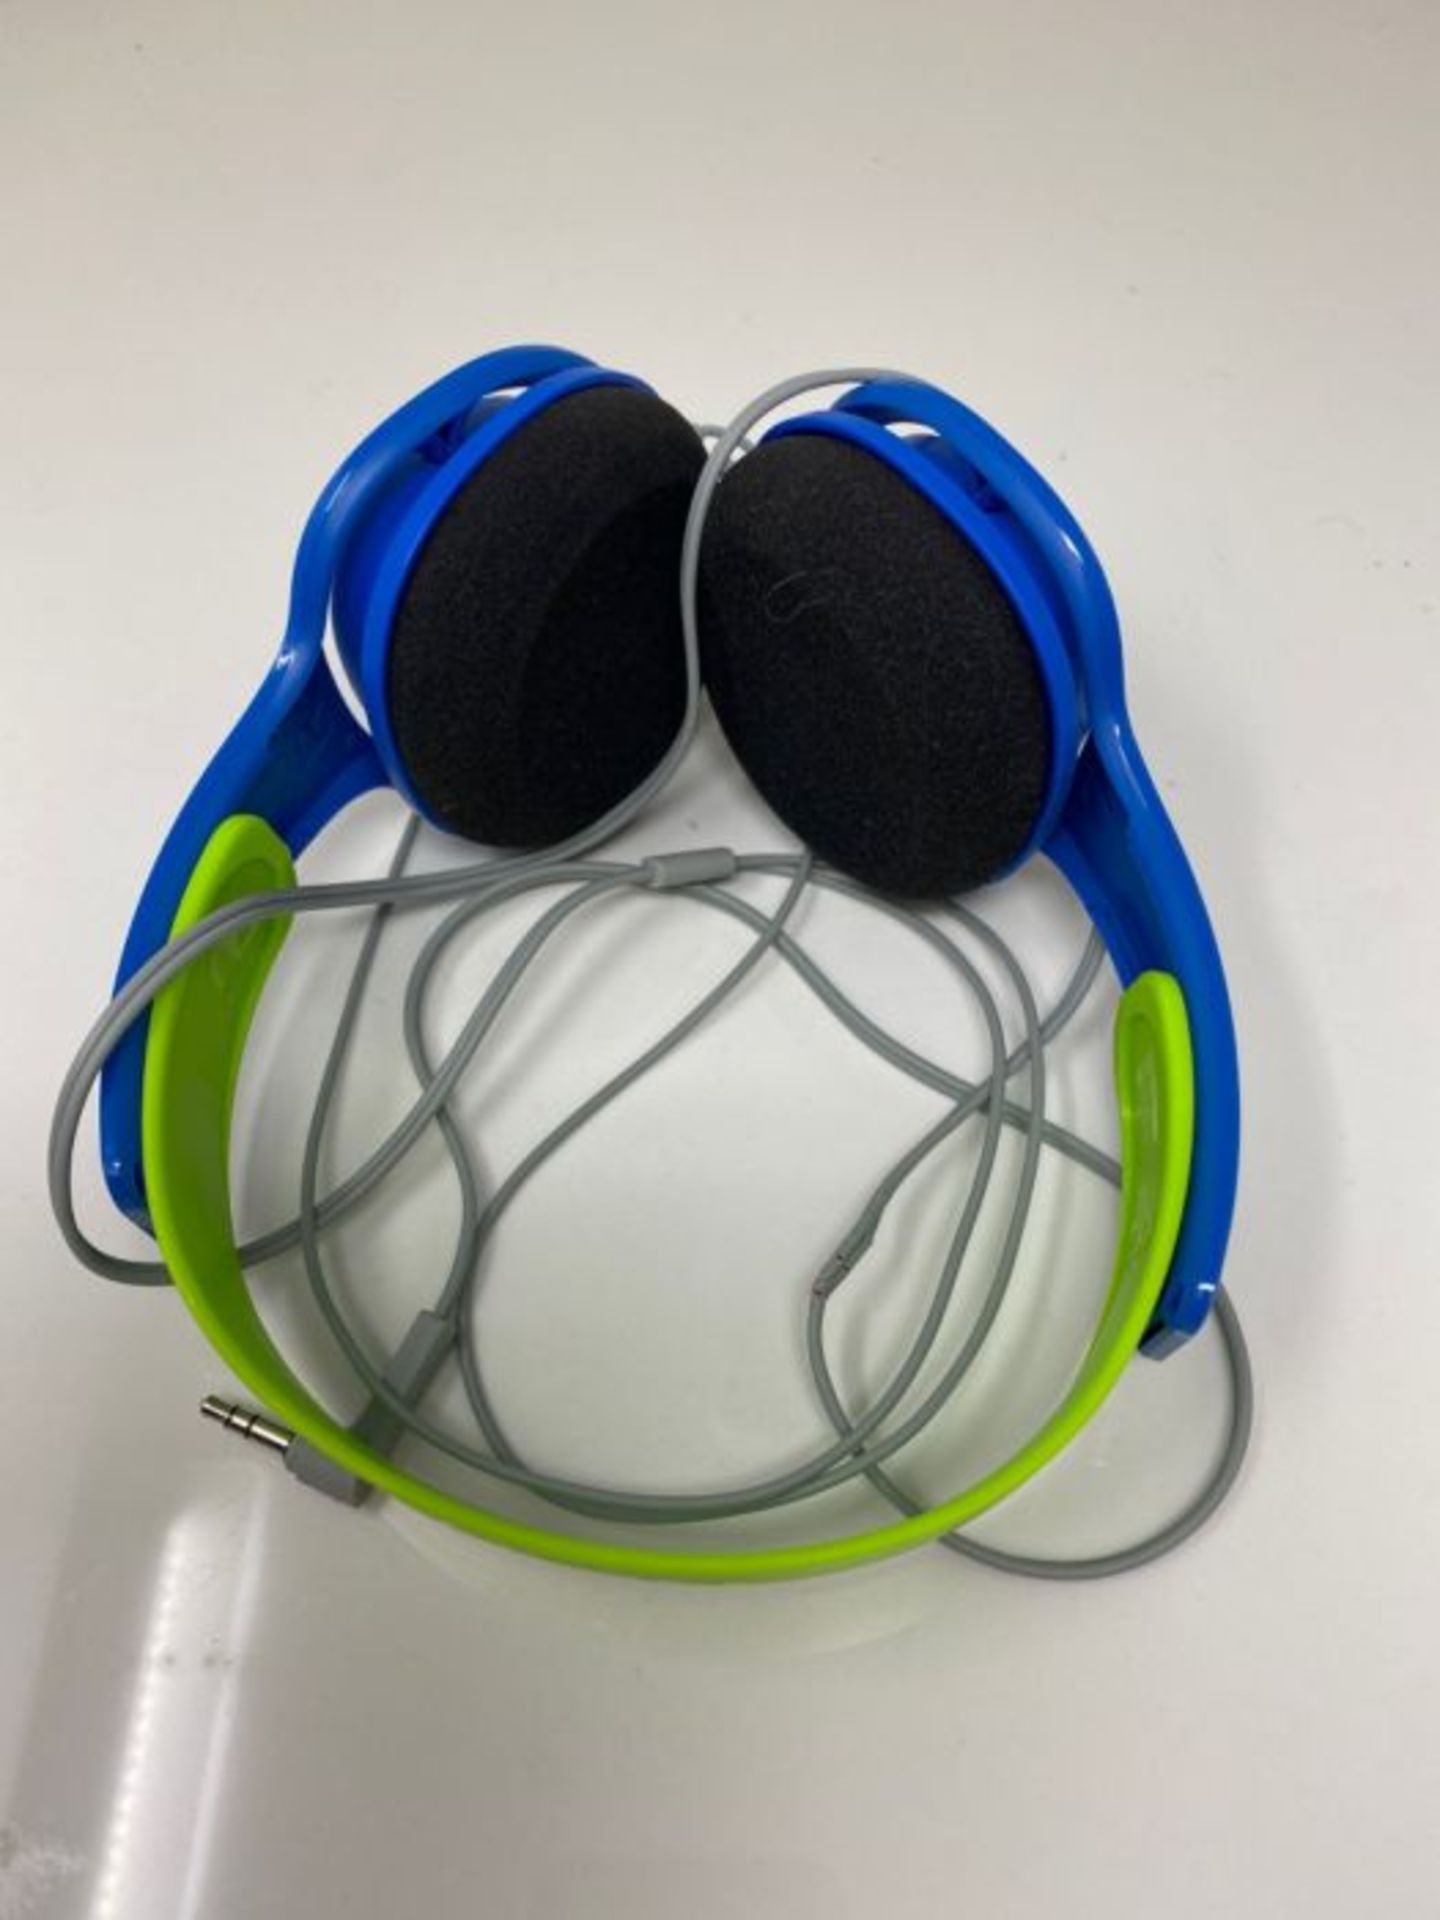 Philips On Ear Headphones for Kids/Children Headphones with Volume Limit (85dB), Noise - Image 2 of 2